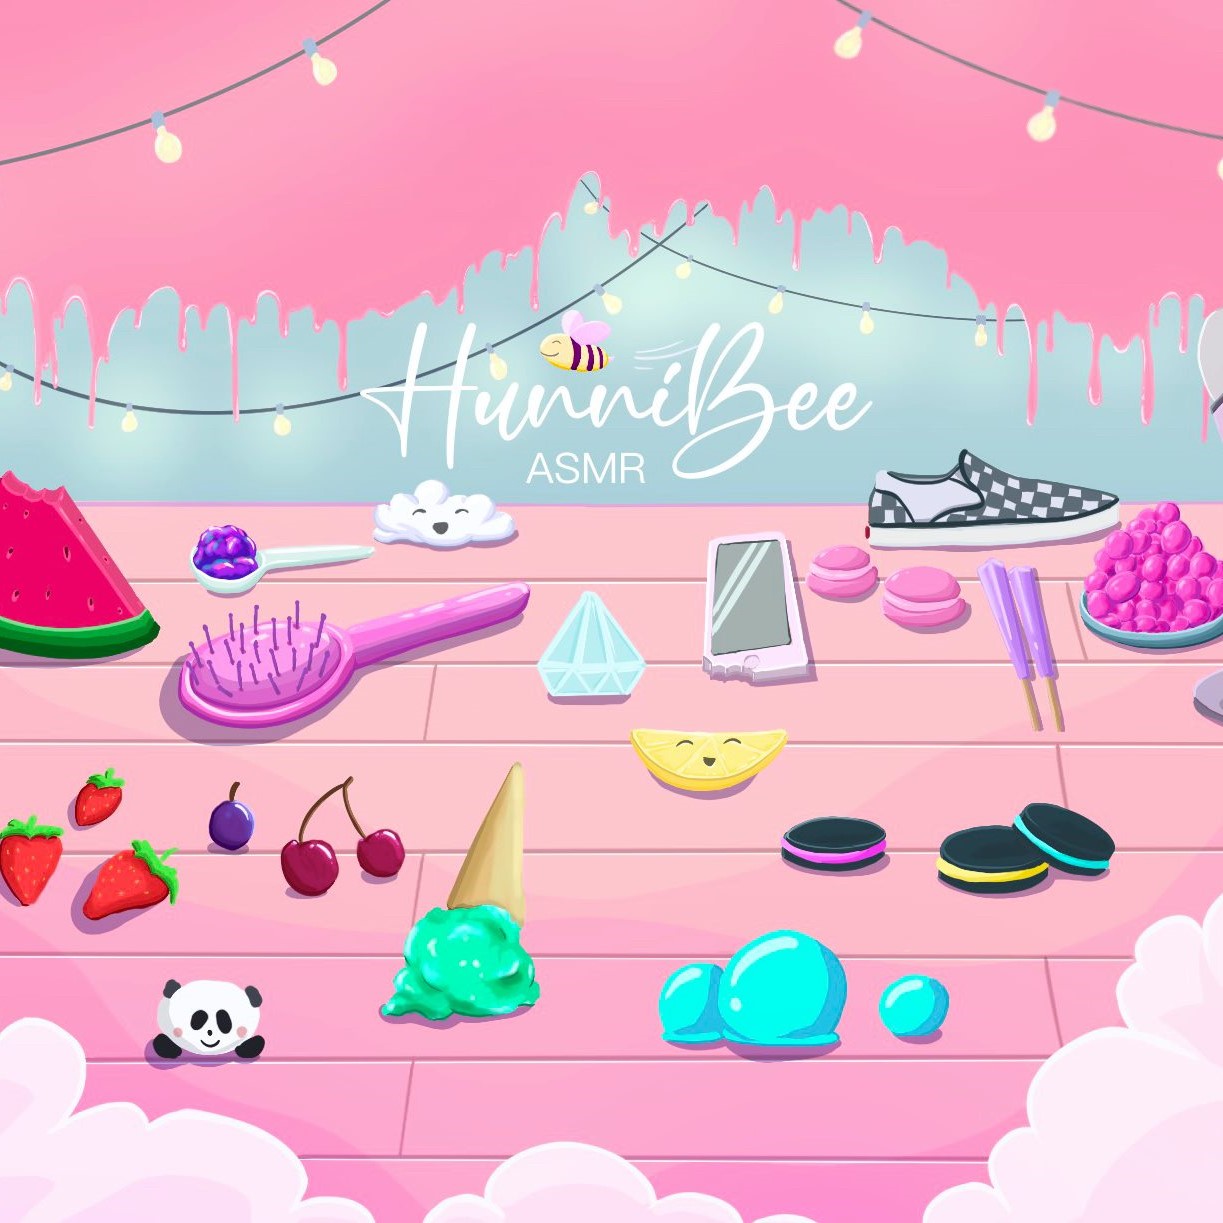 A photo of HunniBee's banner. It has a pink drip on a blue wall and a pink table with string lights hanging from the middle out. In the middle it says HunniBee ASMR with a yellow bee on top. There are miscellaneous objects on the table including food and objects. Pink clouds surround the bottom.